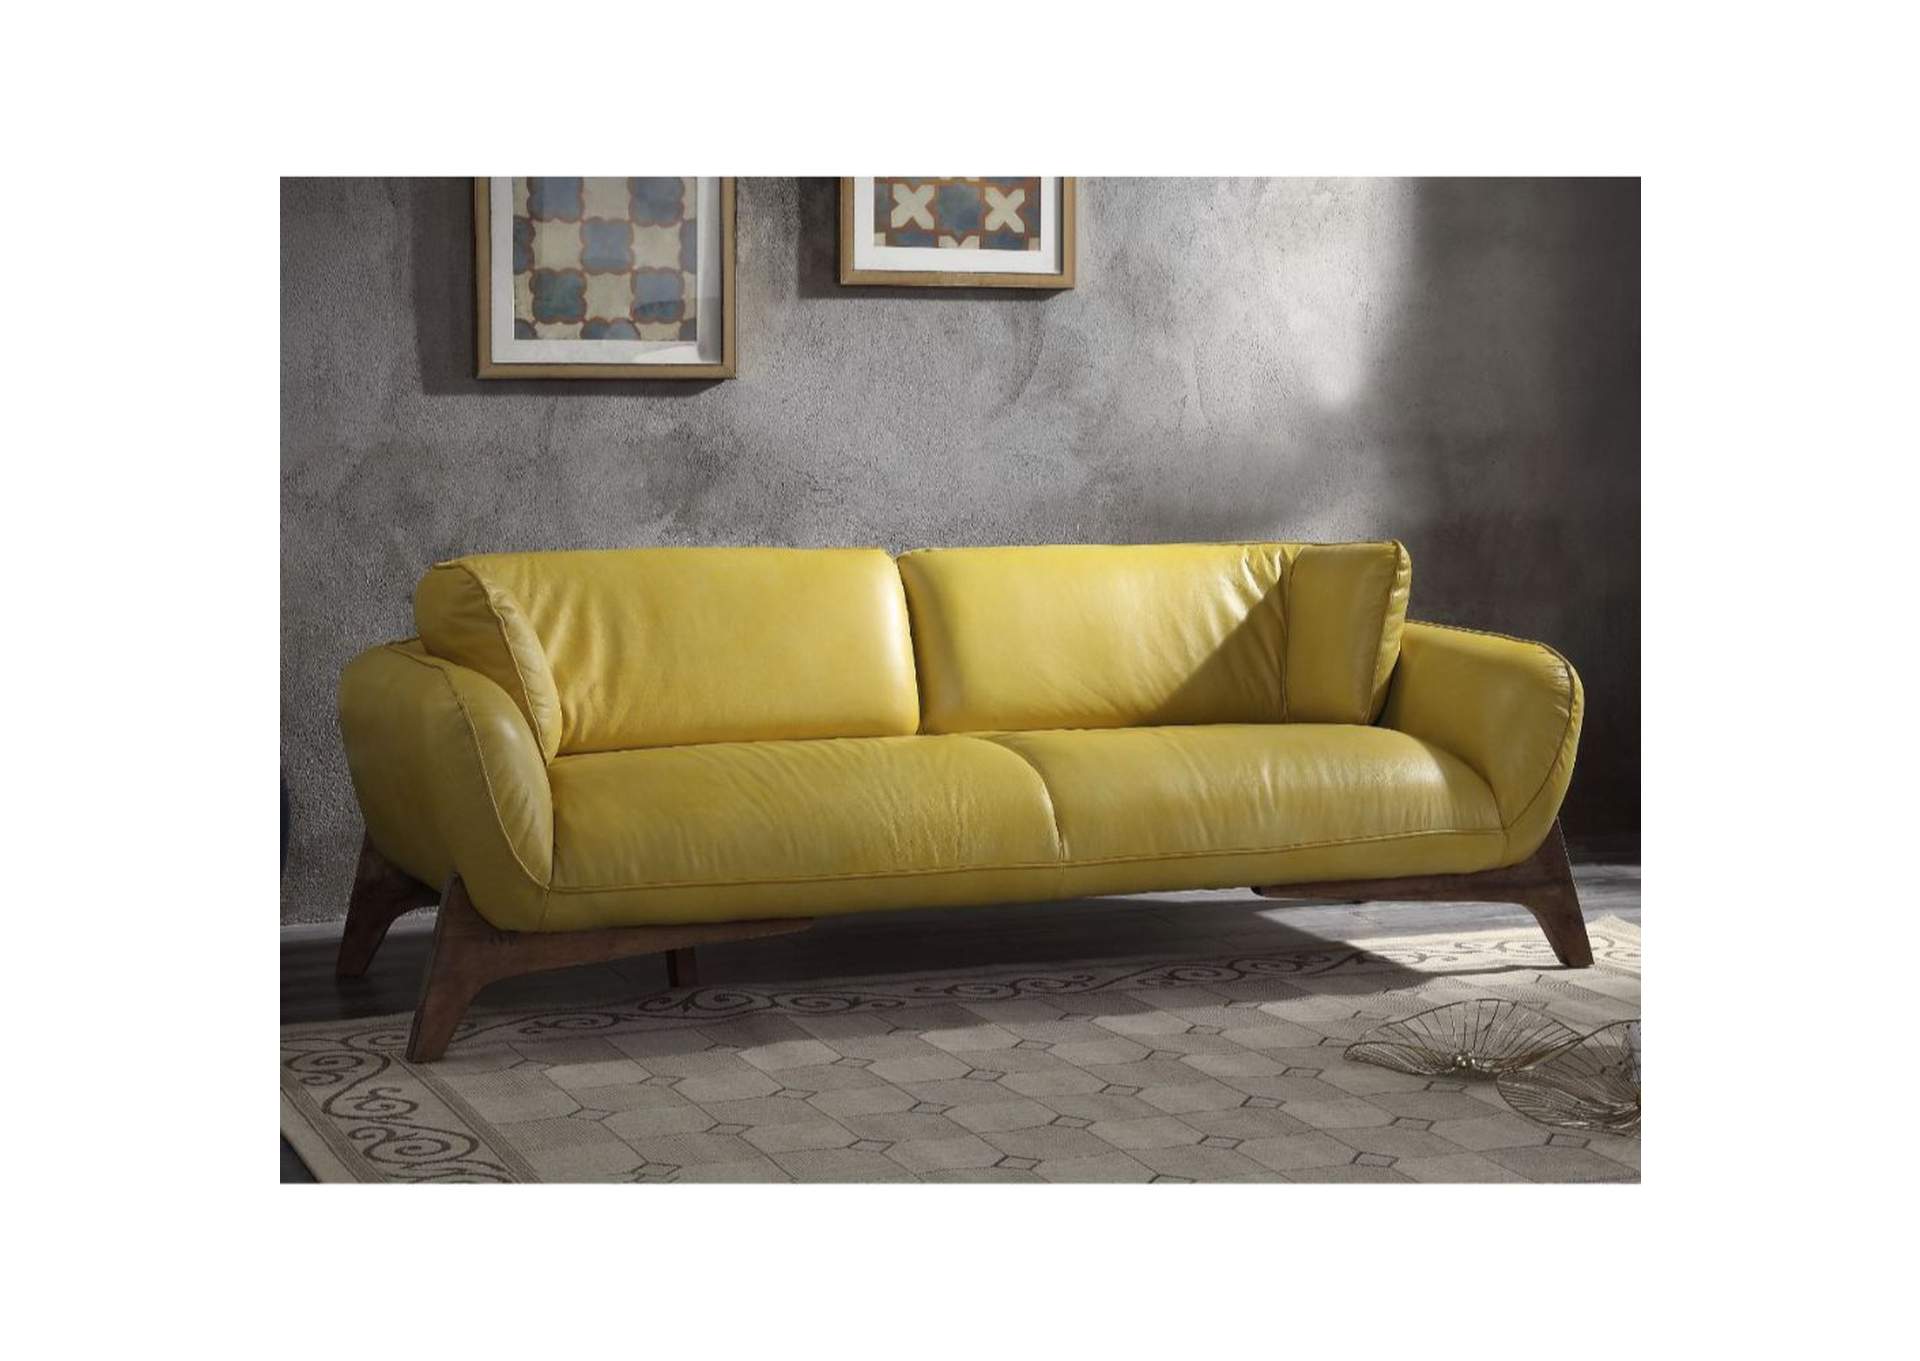 Pesach Yellow Sofa Best Buy Furniture And Mattress